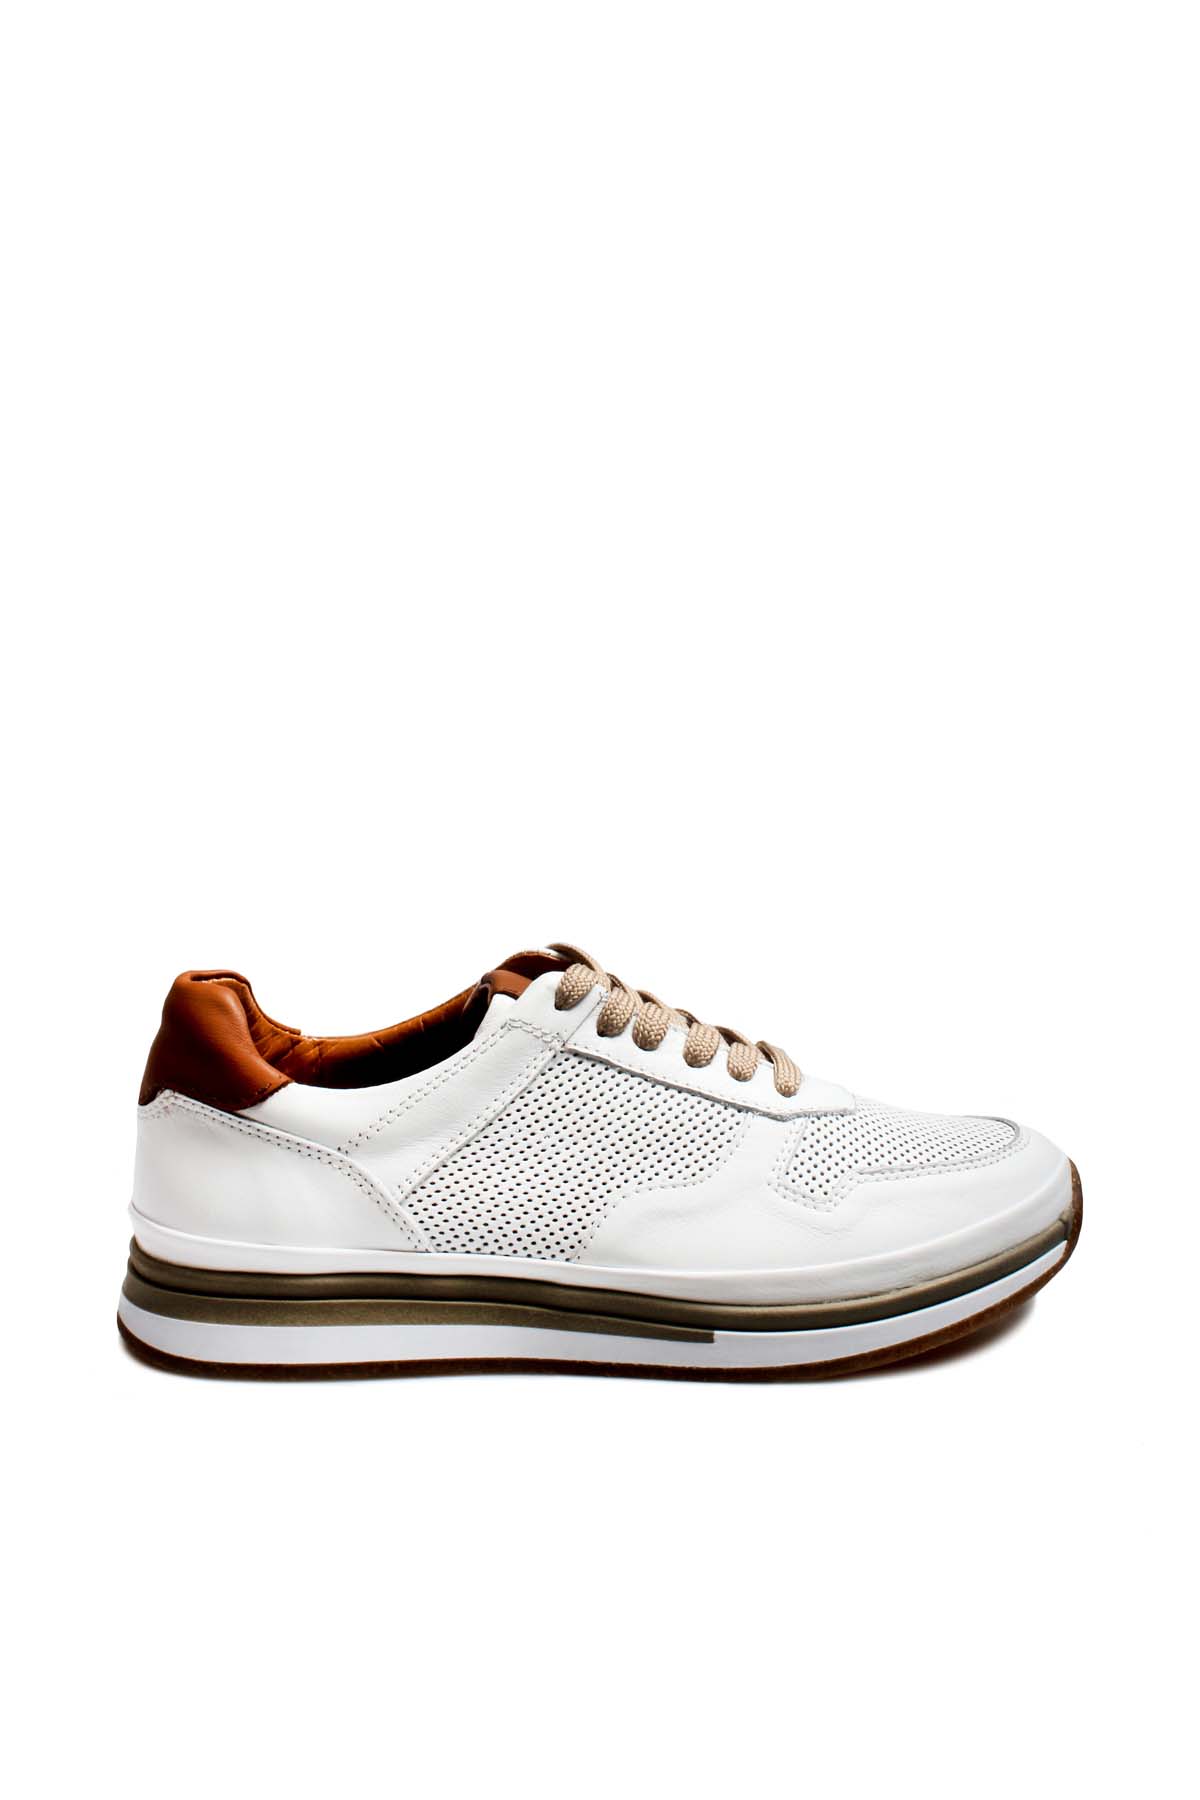 Fast Step Men Genuine Leather Daily Shoes White Tan 717MA17397